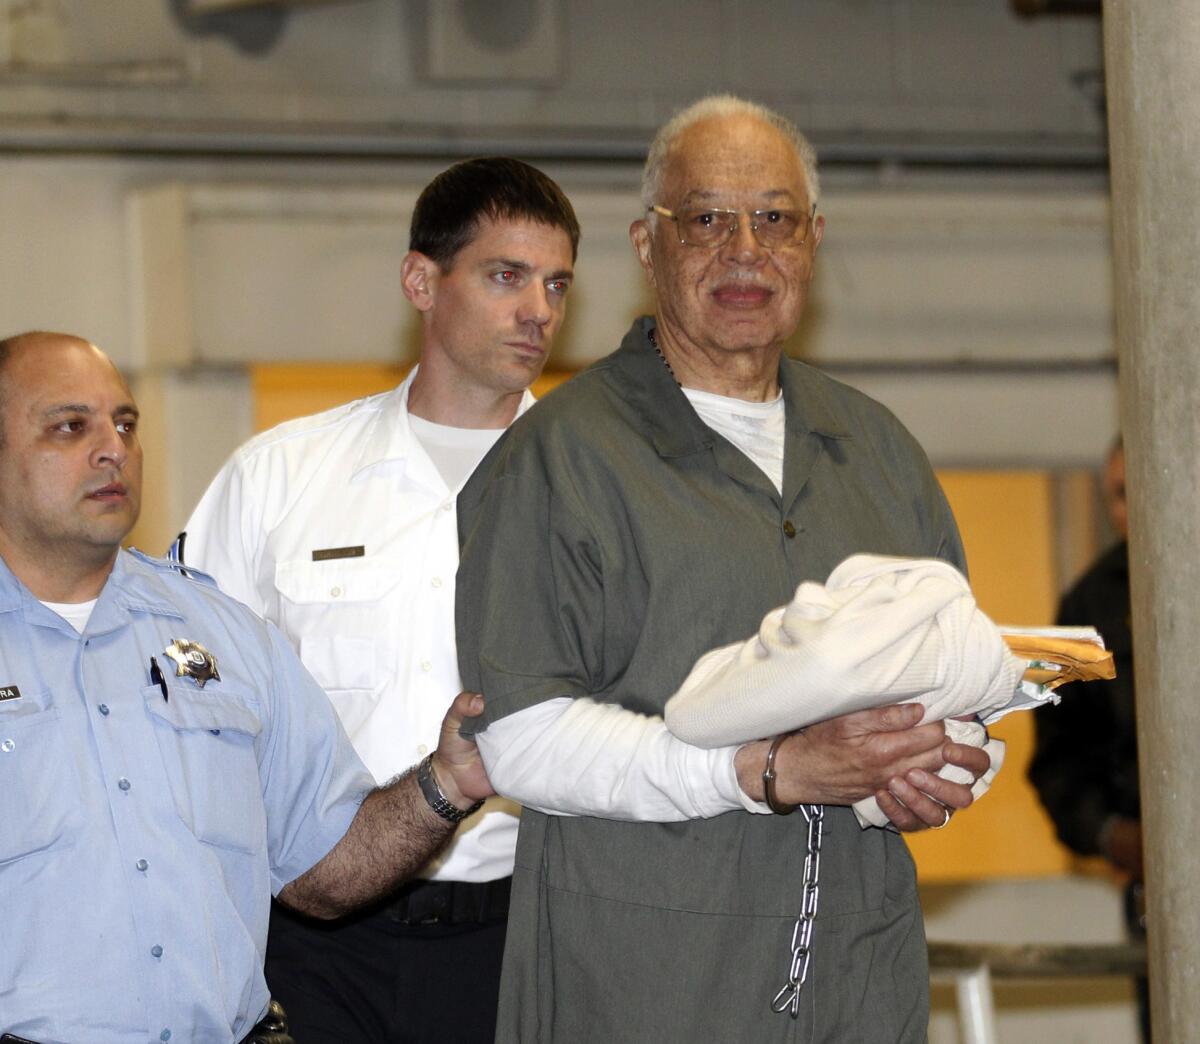 Dr. Kermit Gosnell is escorted to a waiting police van upon leaving the Criminal Justice Center in Philadelphia.